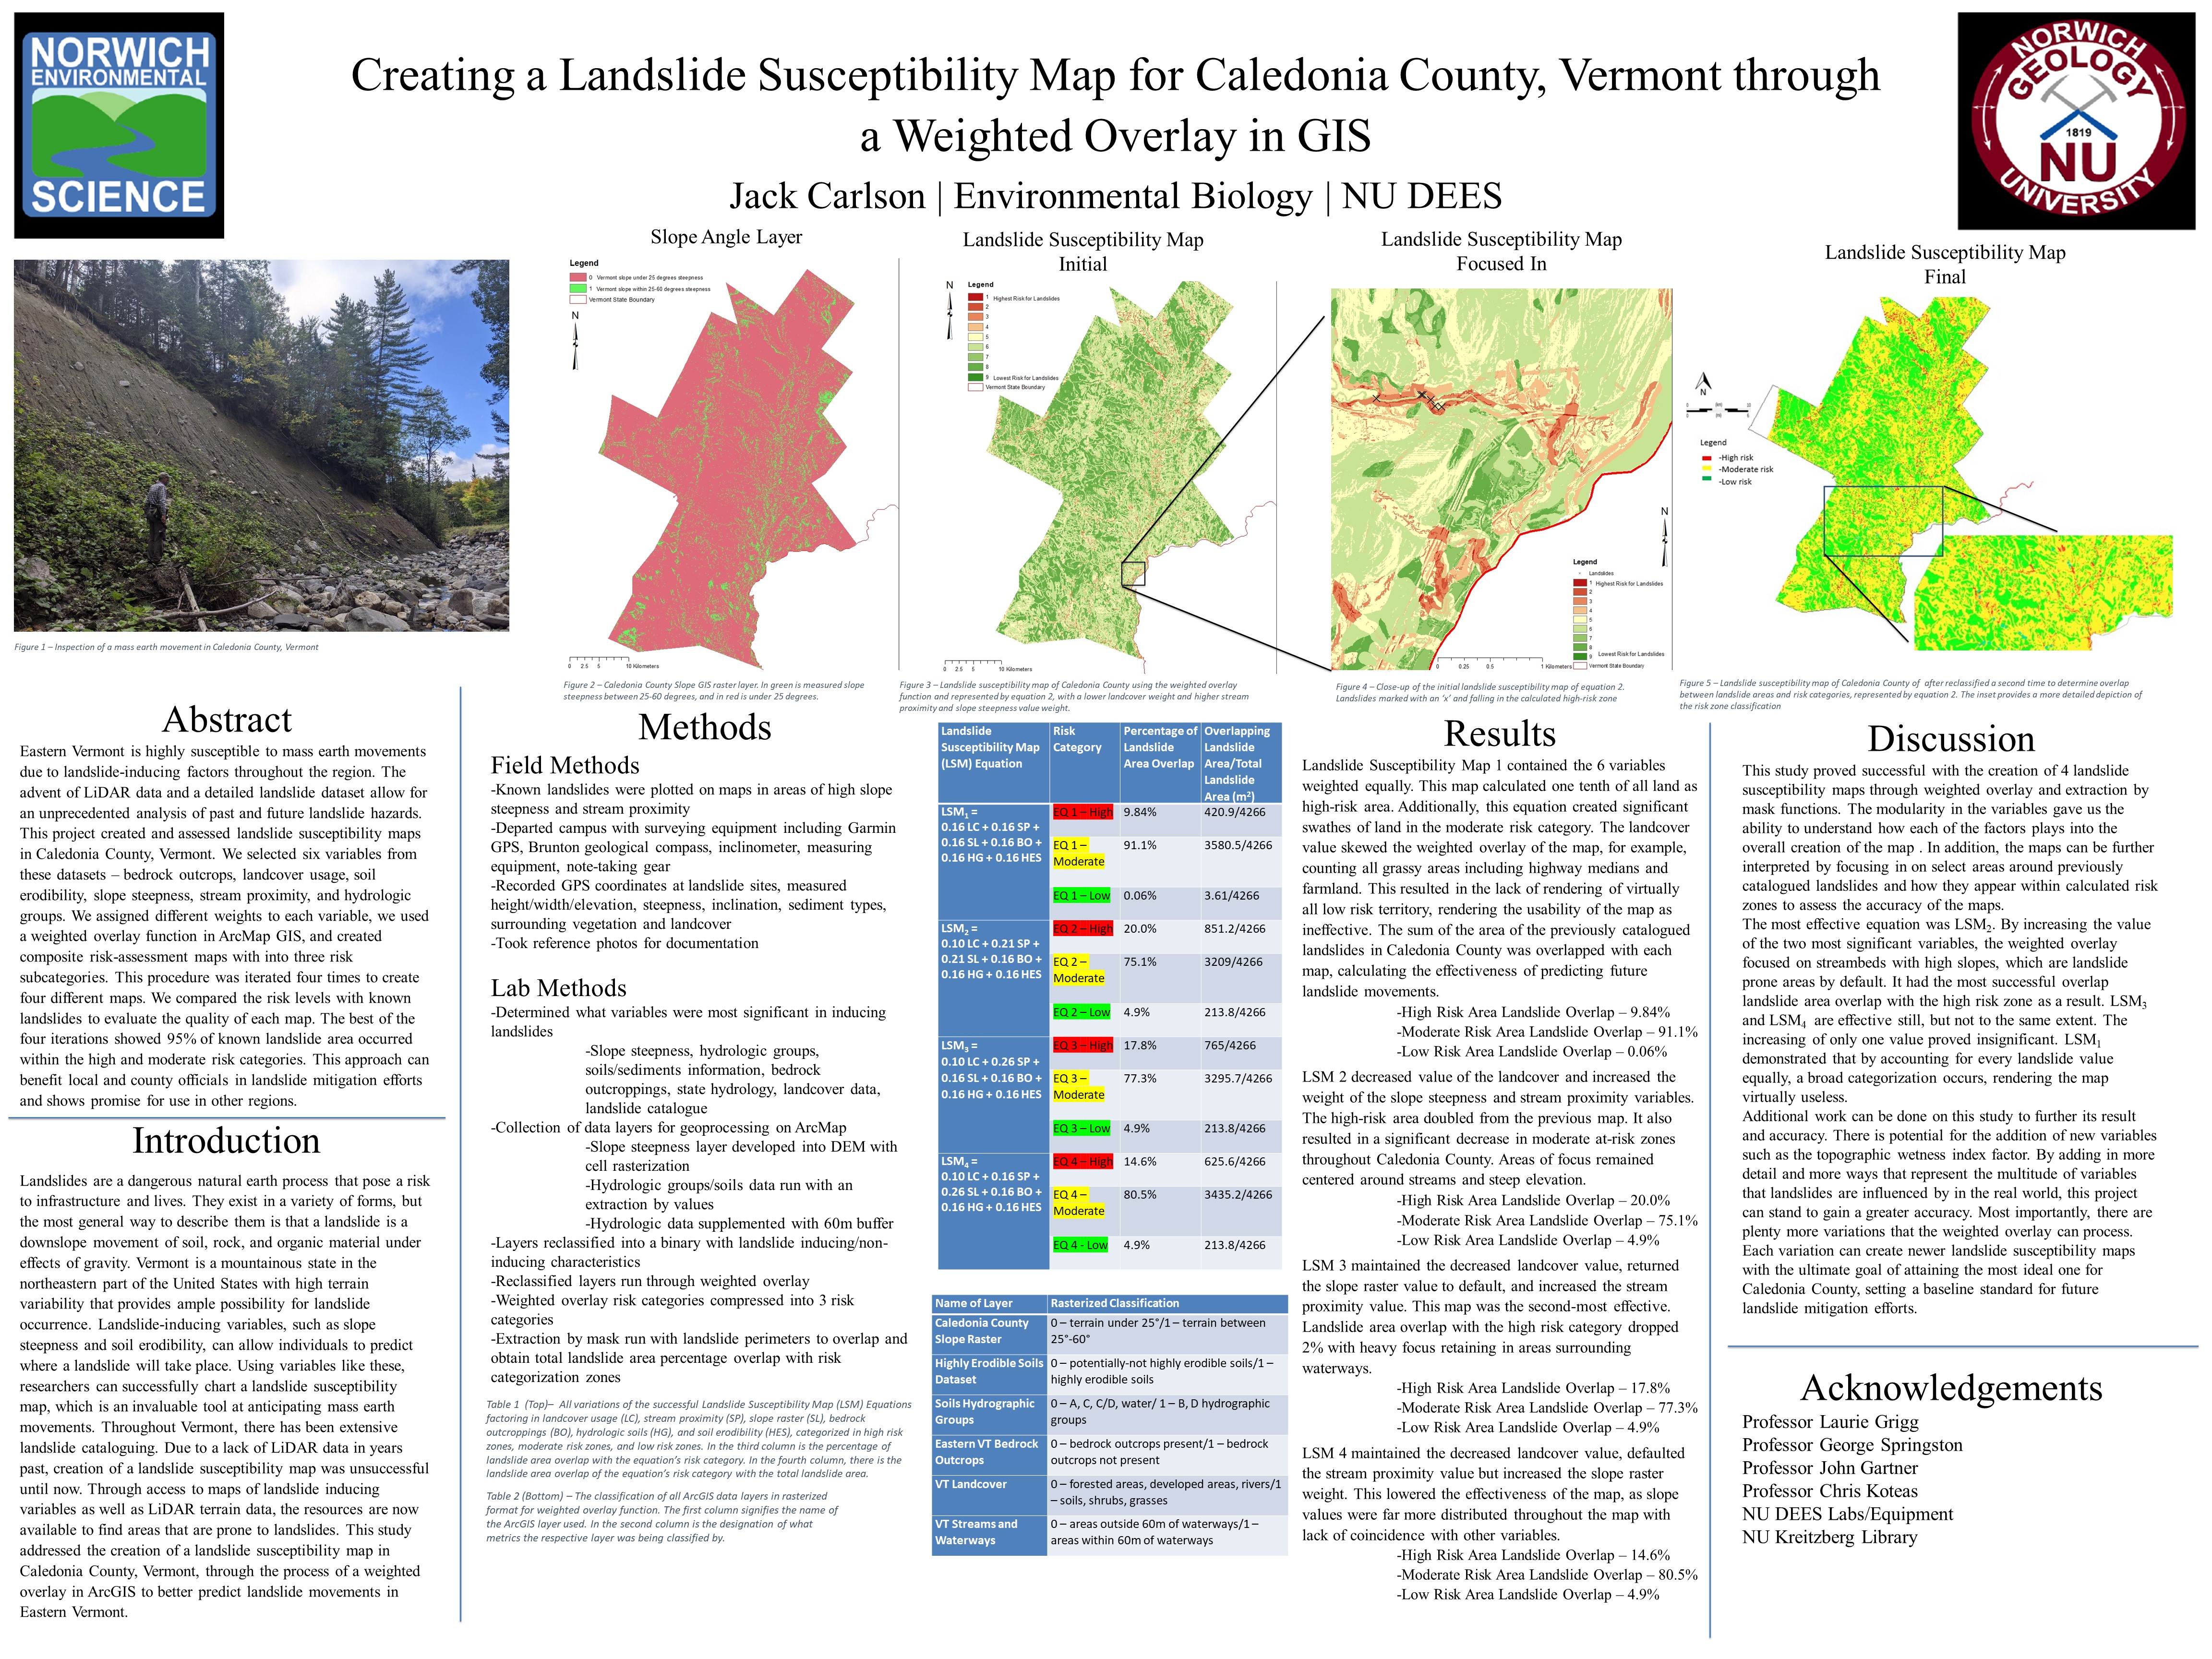 Showcase Image for Creating a Landslide Susceptibility Map for Caledonia County, Vermont through  a Weighted Overlay in GIS